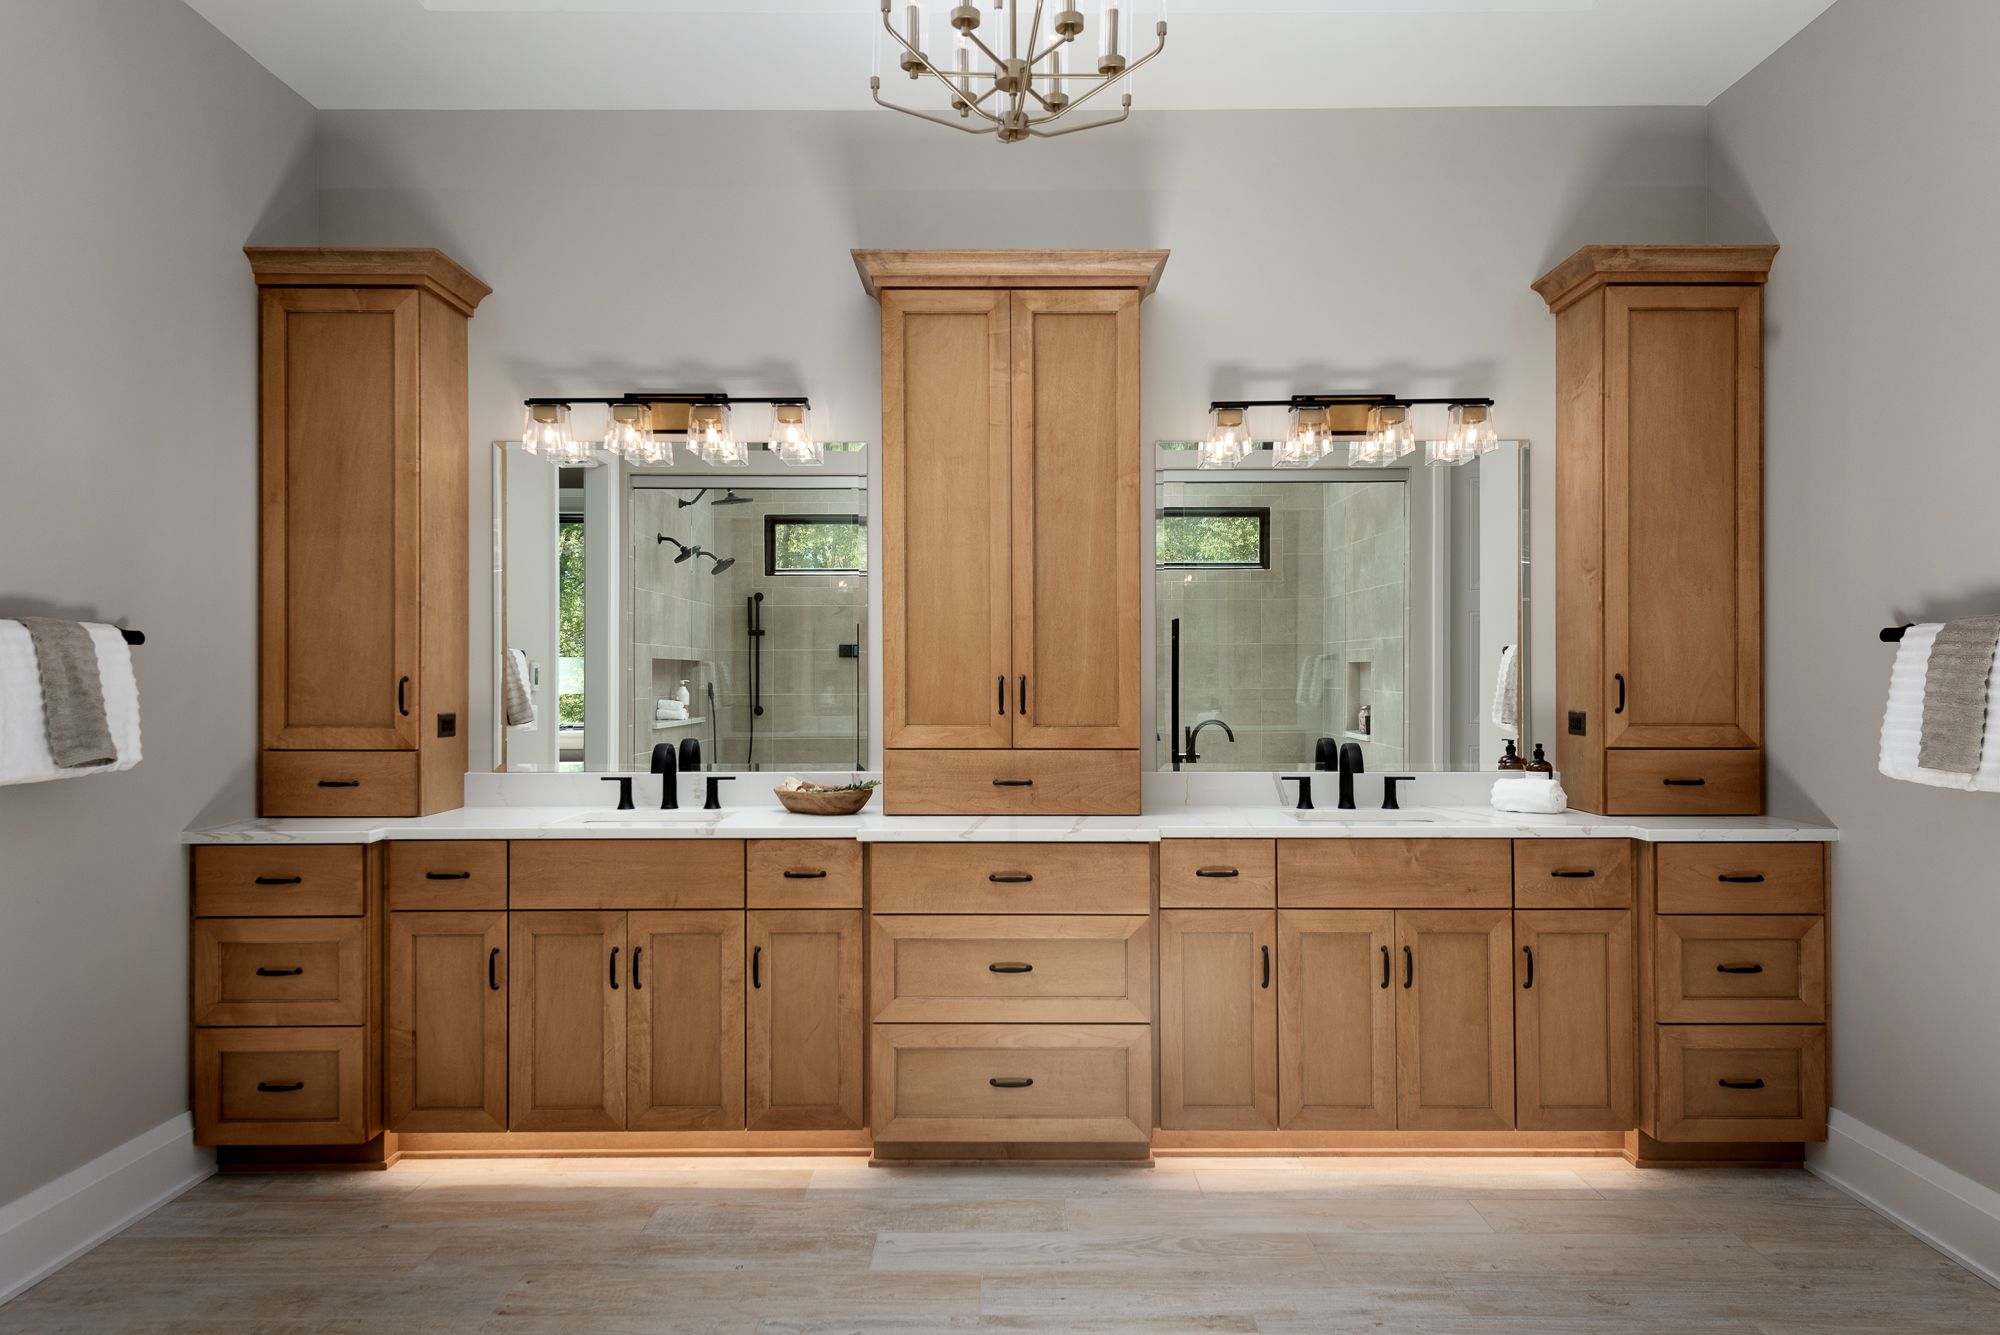 Master bathroom with large double vanity in wood and black hardware